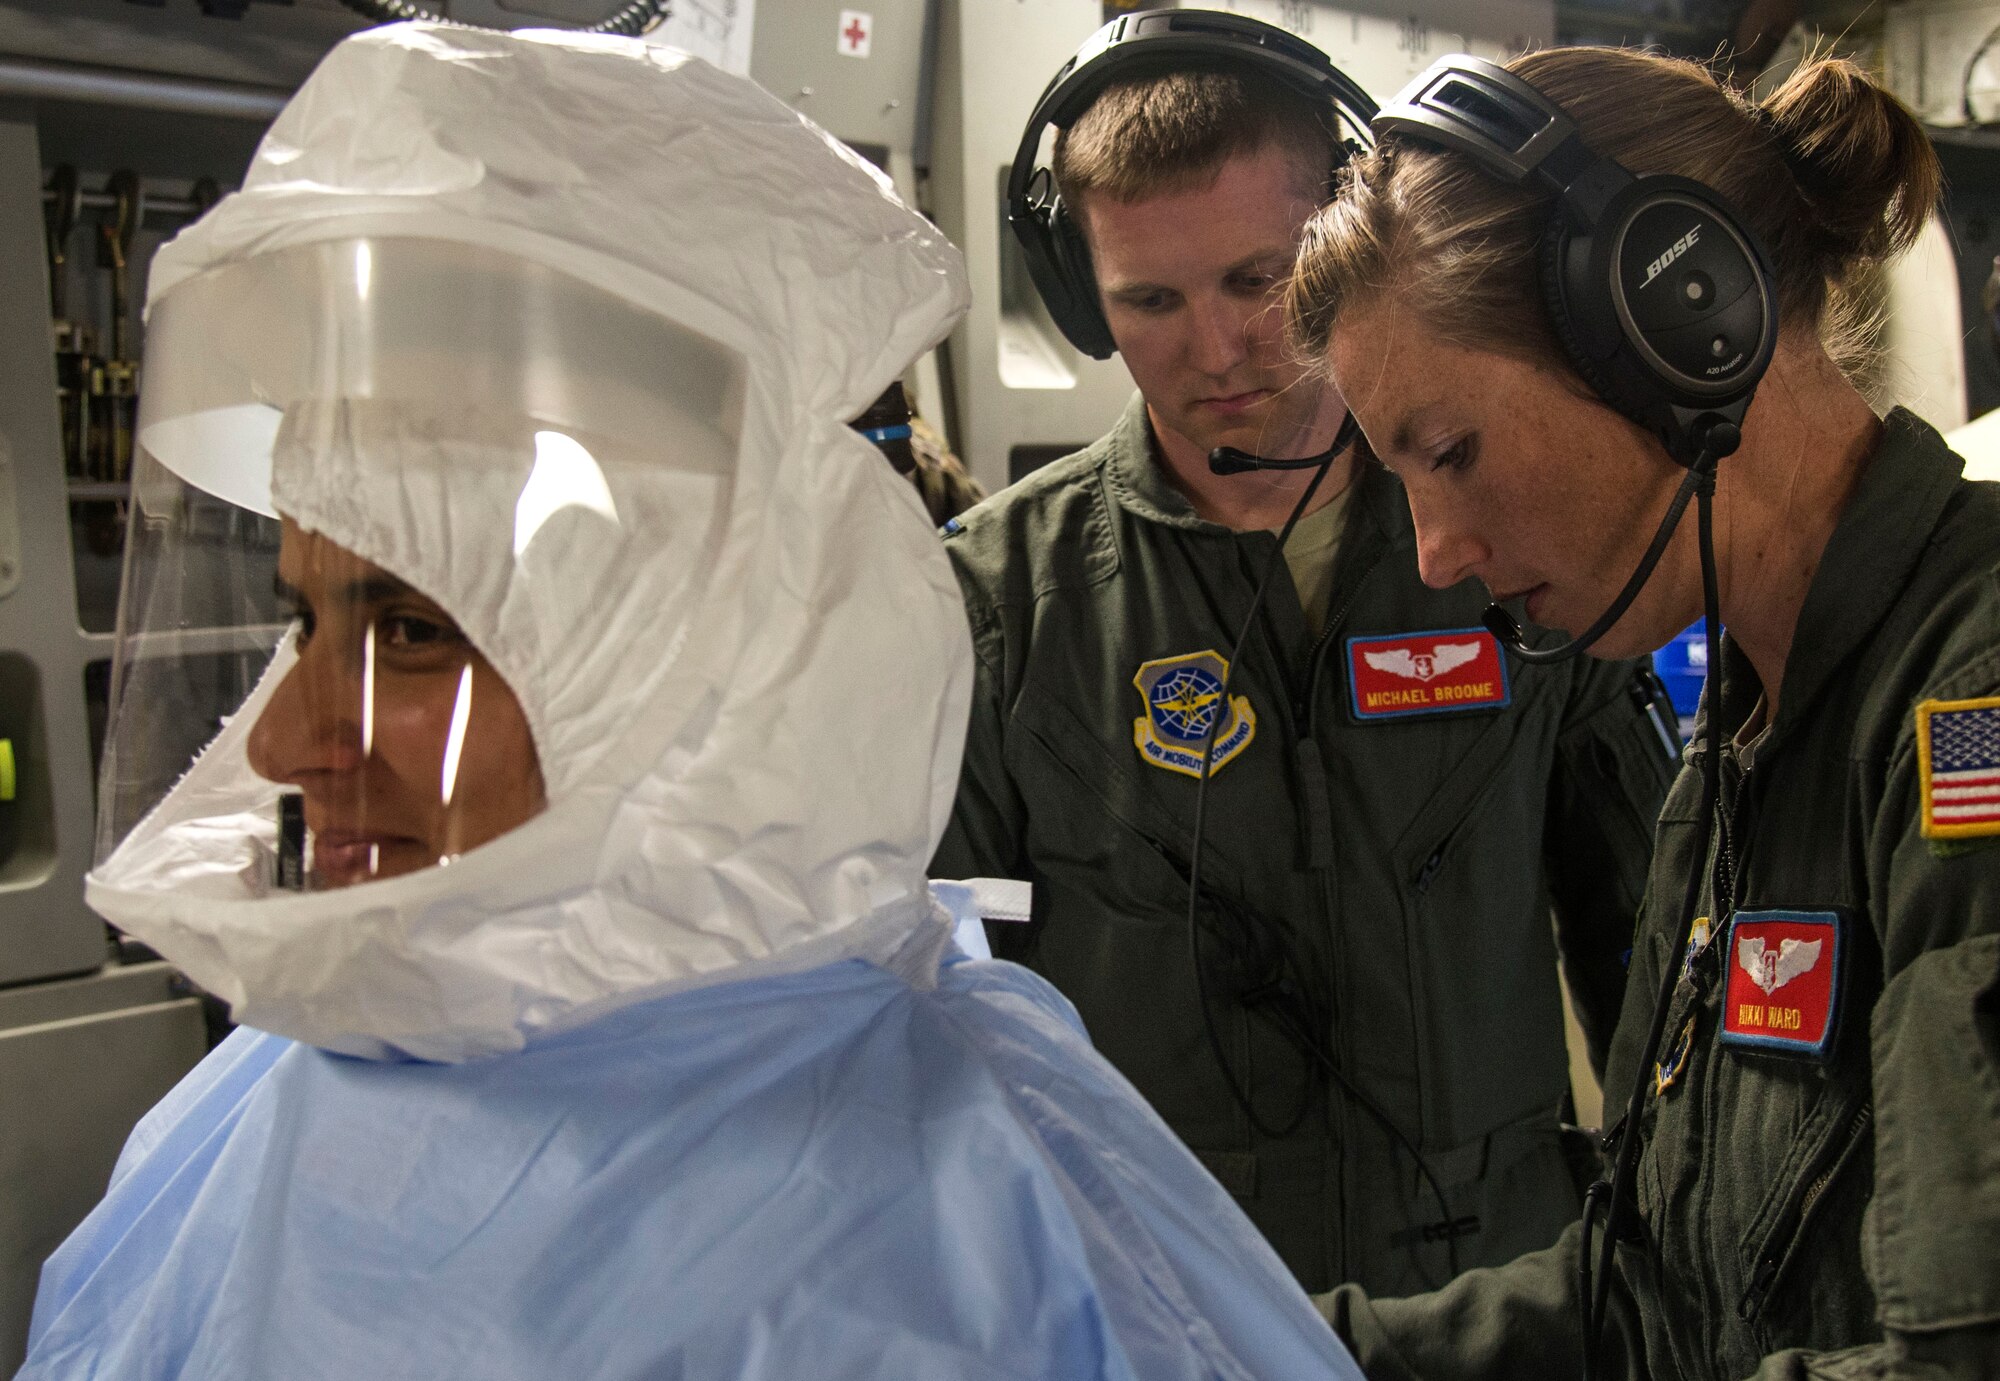 Captains Micheal Broome and Nicole Ward, 375th Aeromedical Evacuation Squadron flight nurses, prepare Capt. Andrea De Oliveira, 375th AES flight nurse to enter a Transportation Isolation System for training, Aug. 18, 2016. The TIS is used to transport sick and contagious patients to more definitive care without compromising the safety of the crew. (U.S. Air Force Photo by Airman Daniel Garcia)